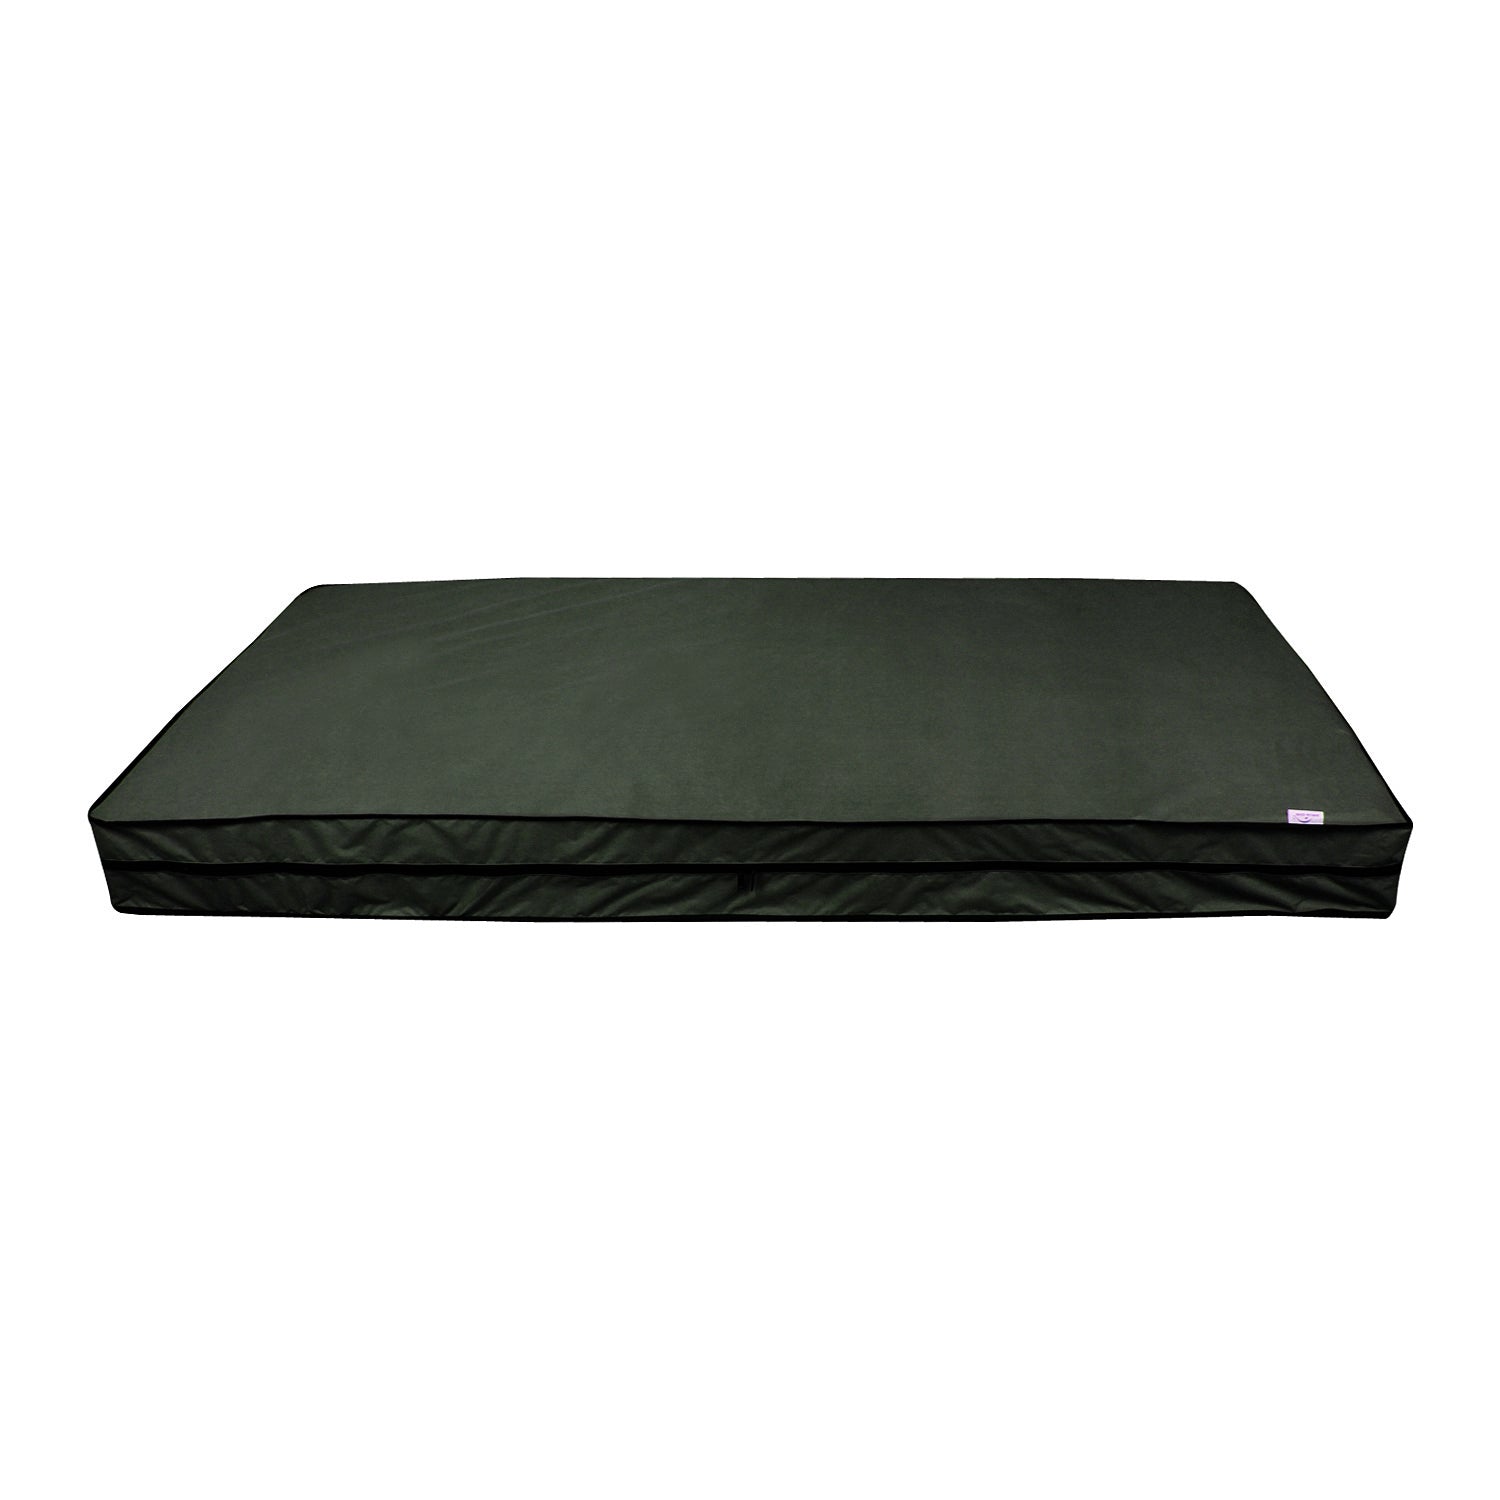 Waterproof Mattress Cover with Zipper, Mazestik Mattress Cover (Green, Available in 17 Sizes)